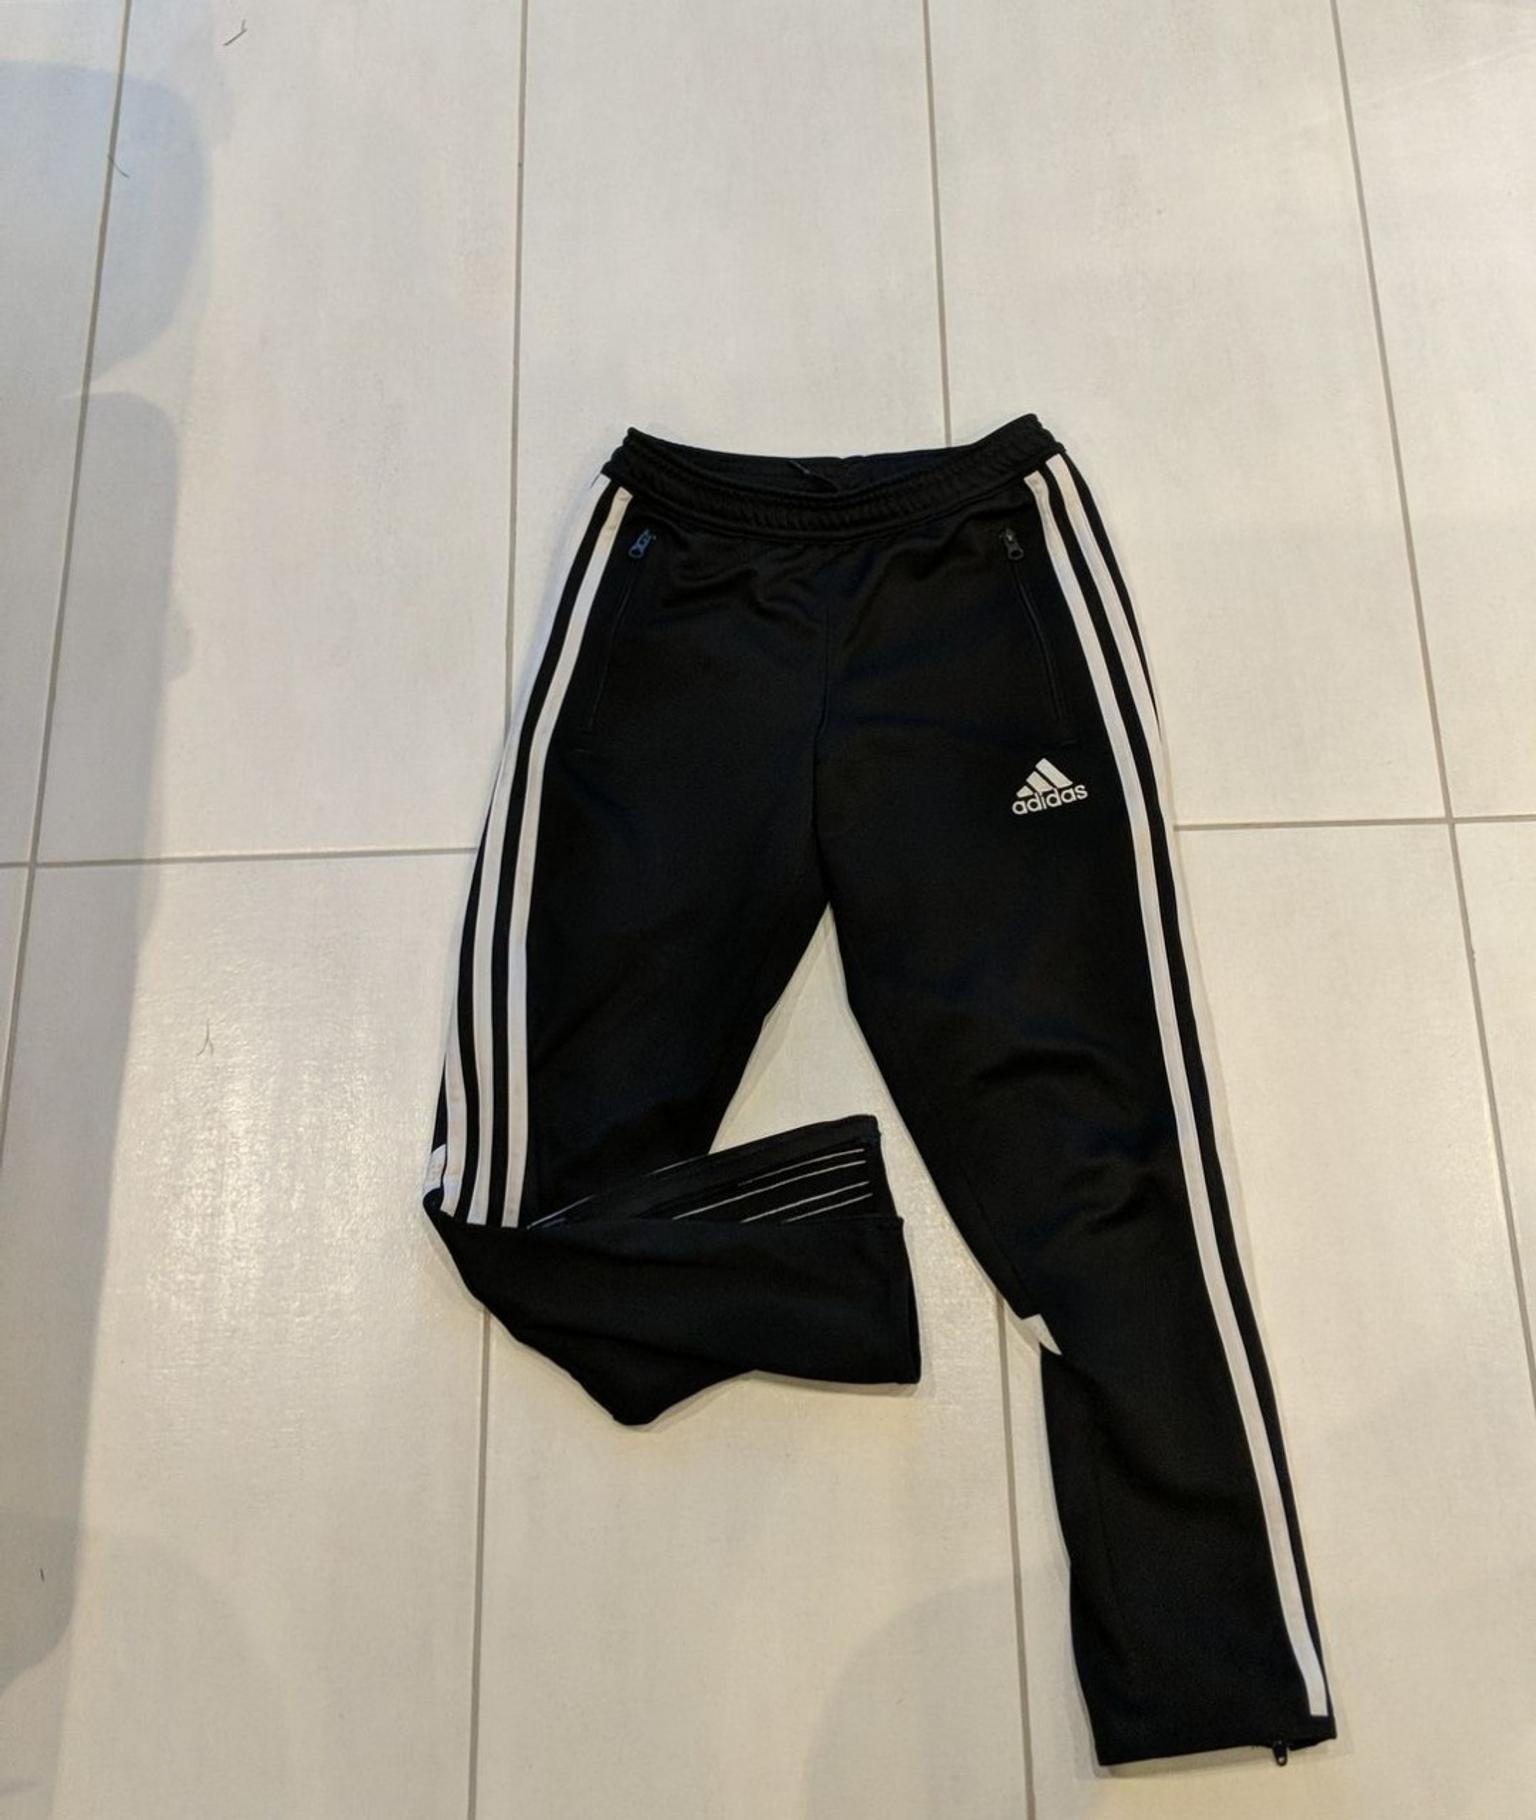 Adidas Climacool tracksuit bottoms. in 